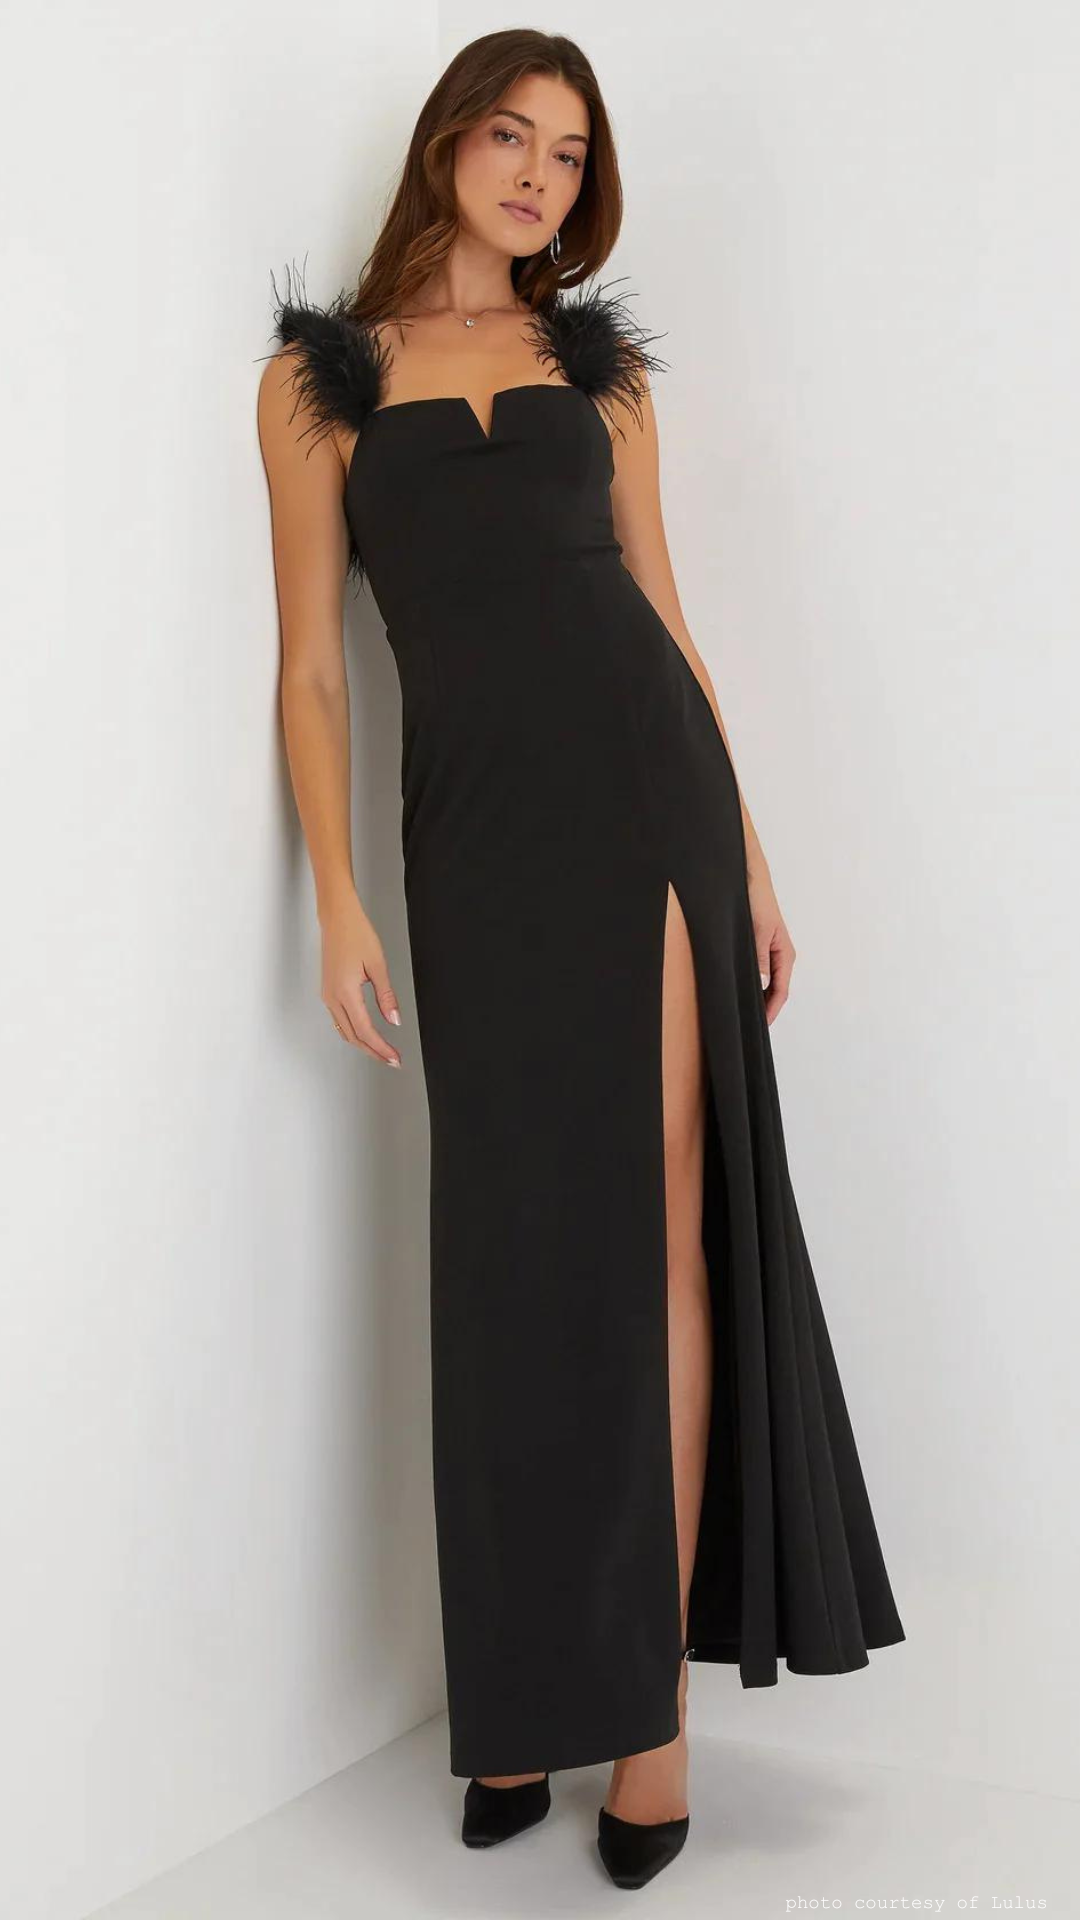 Lulus glamorous impression feather strap mermaid maxi dress sold at Harbour Thread